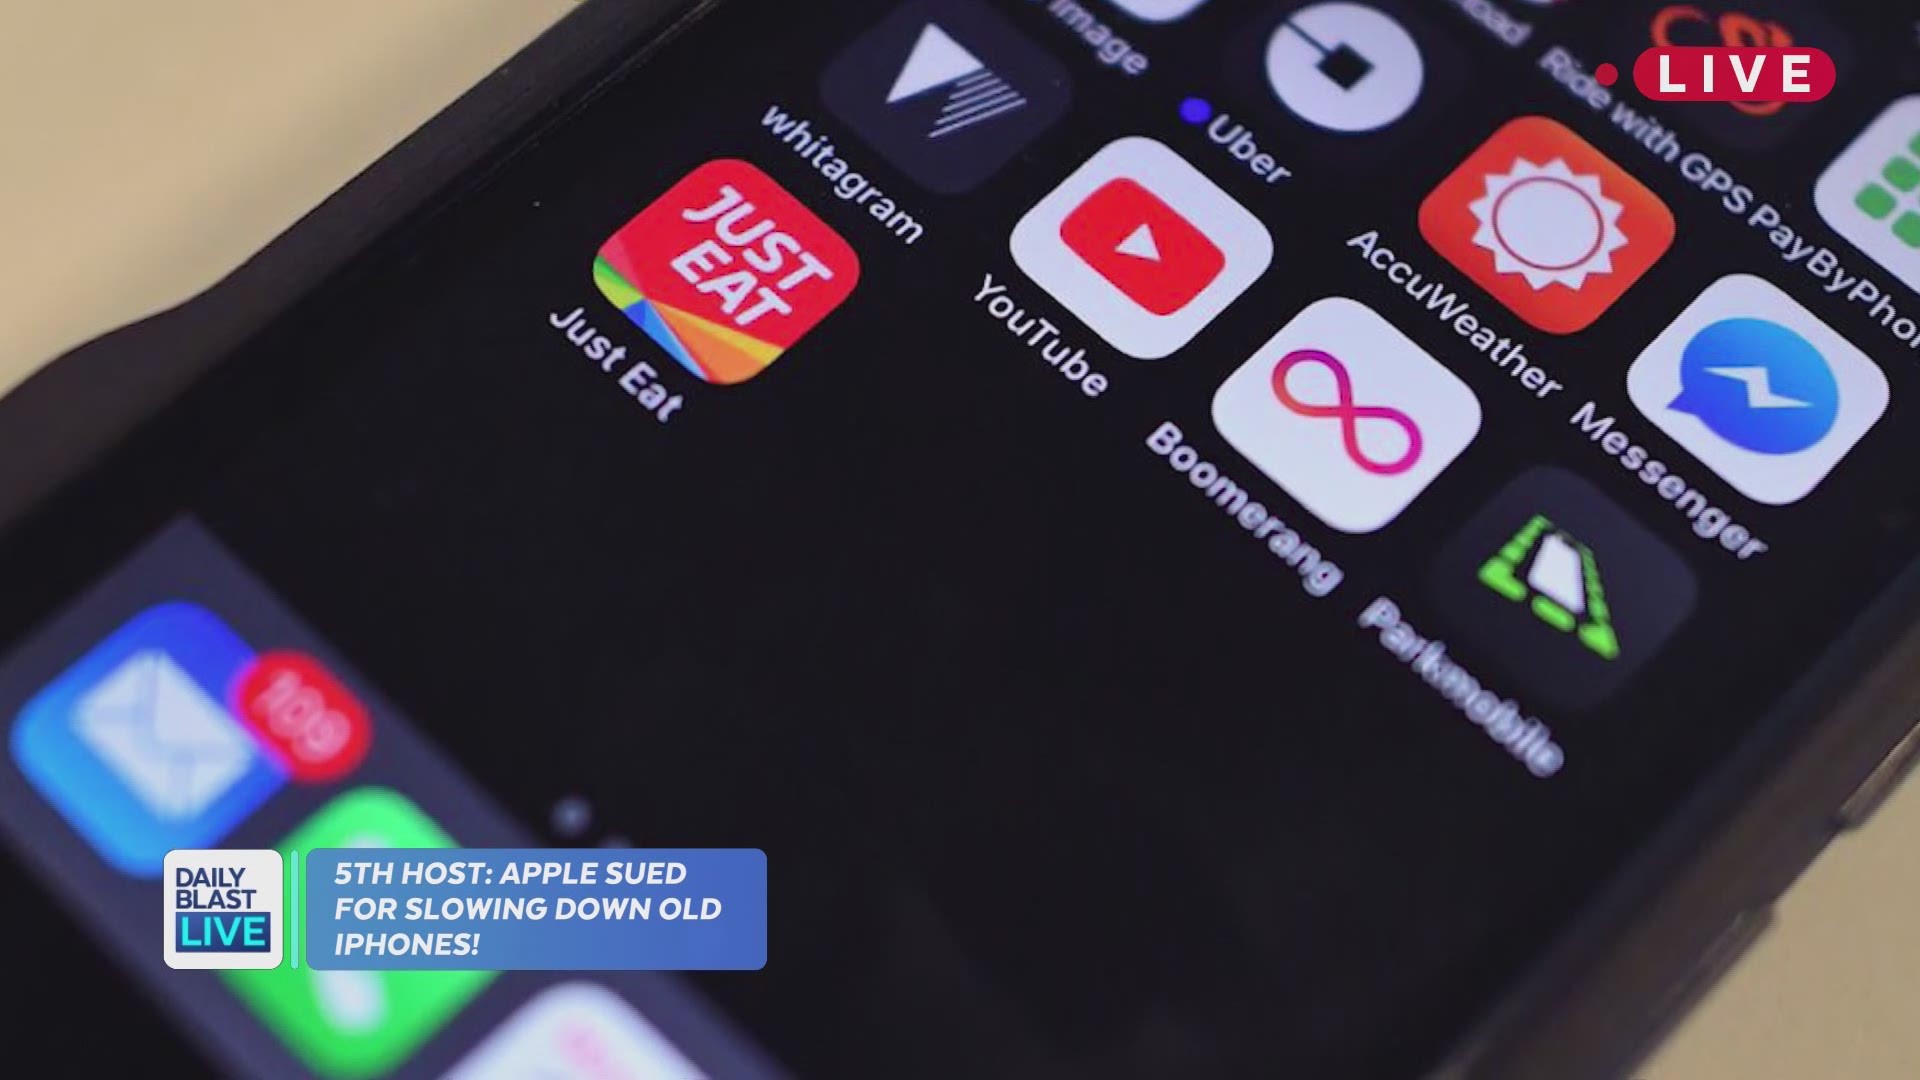 Apple is being sued over slowing down older iPhones. Apples has admitted that it intentionally slows down older iPhone models to help preserve battery life in older phones. According to TMZ, a new class action suit has been filed against the company by St